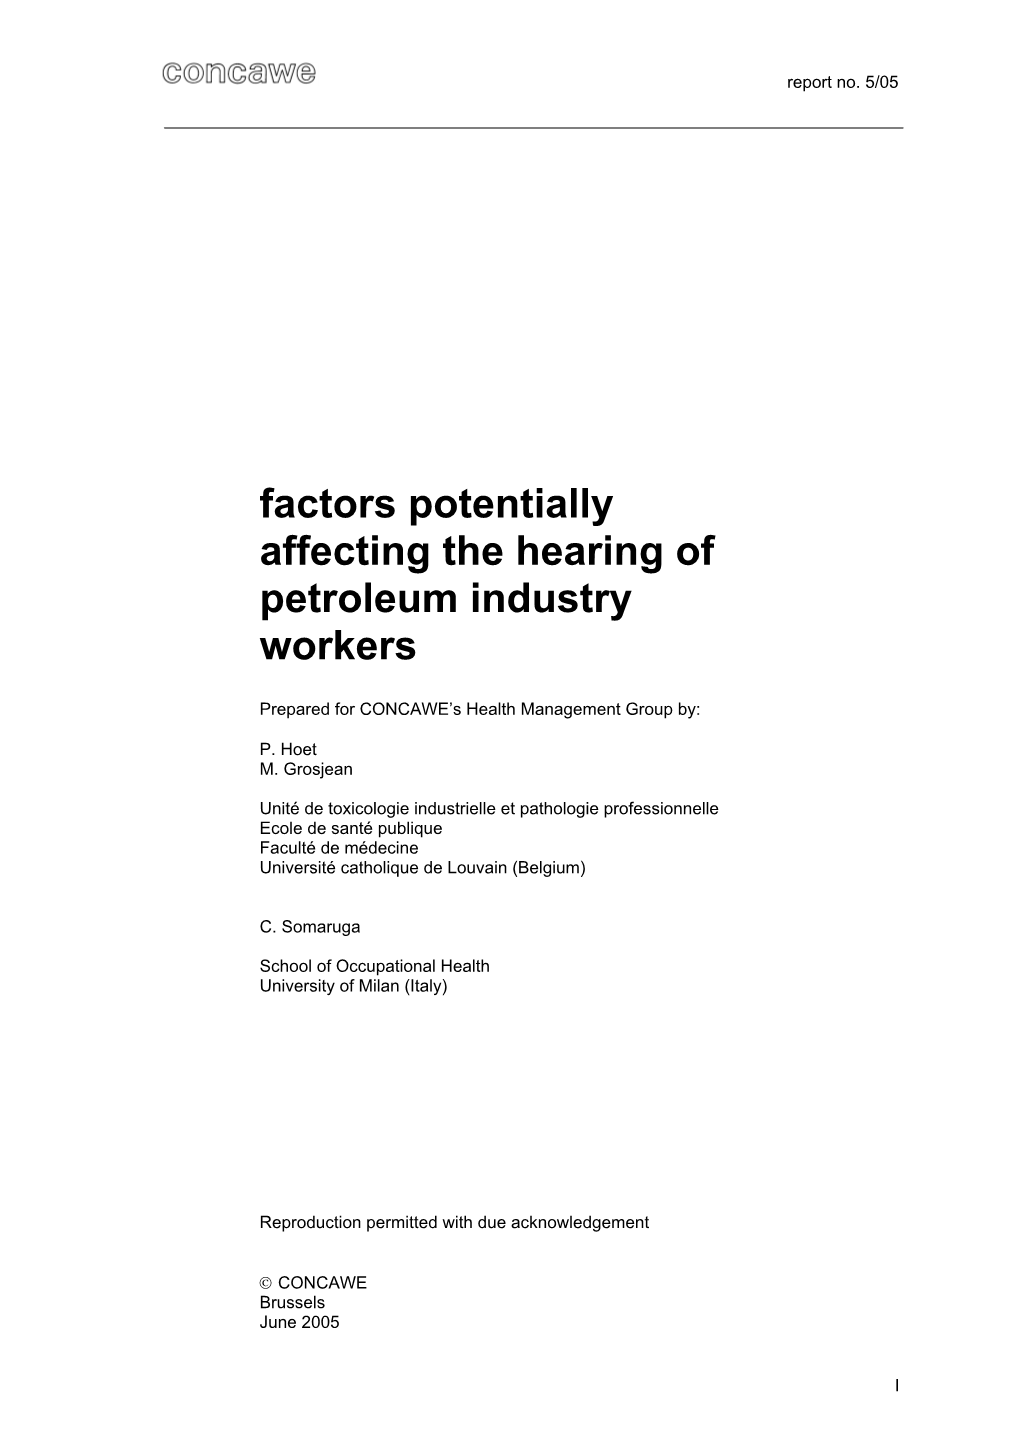 Factors Potentially Affecting the Hearing of Petroleum Industry Workers